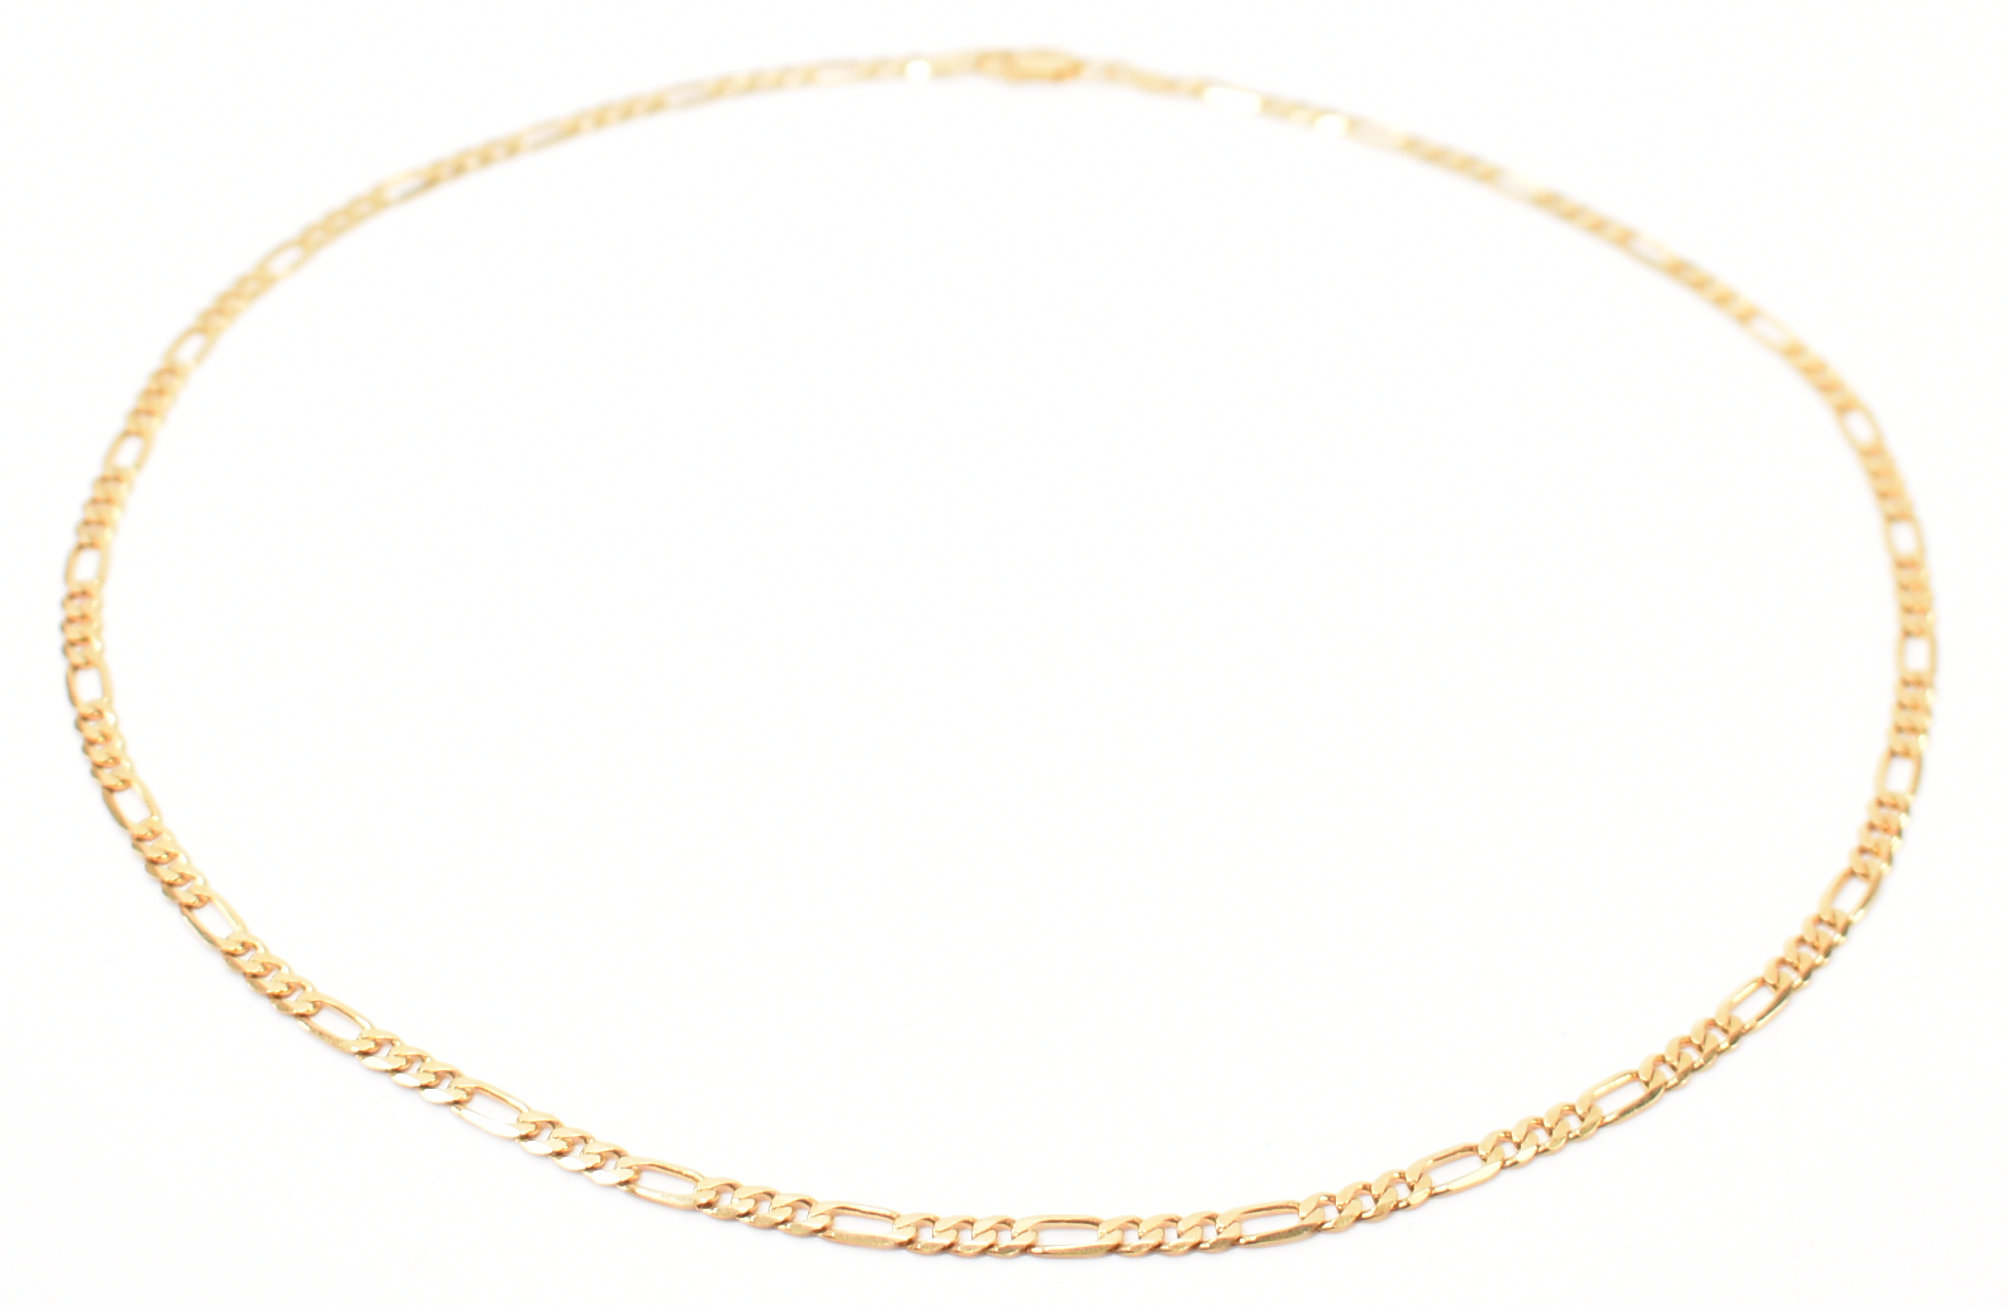 HALLMARKED 9CT GOLD FIGARO CHAIN NECKLACE - Image 2 of 4